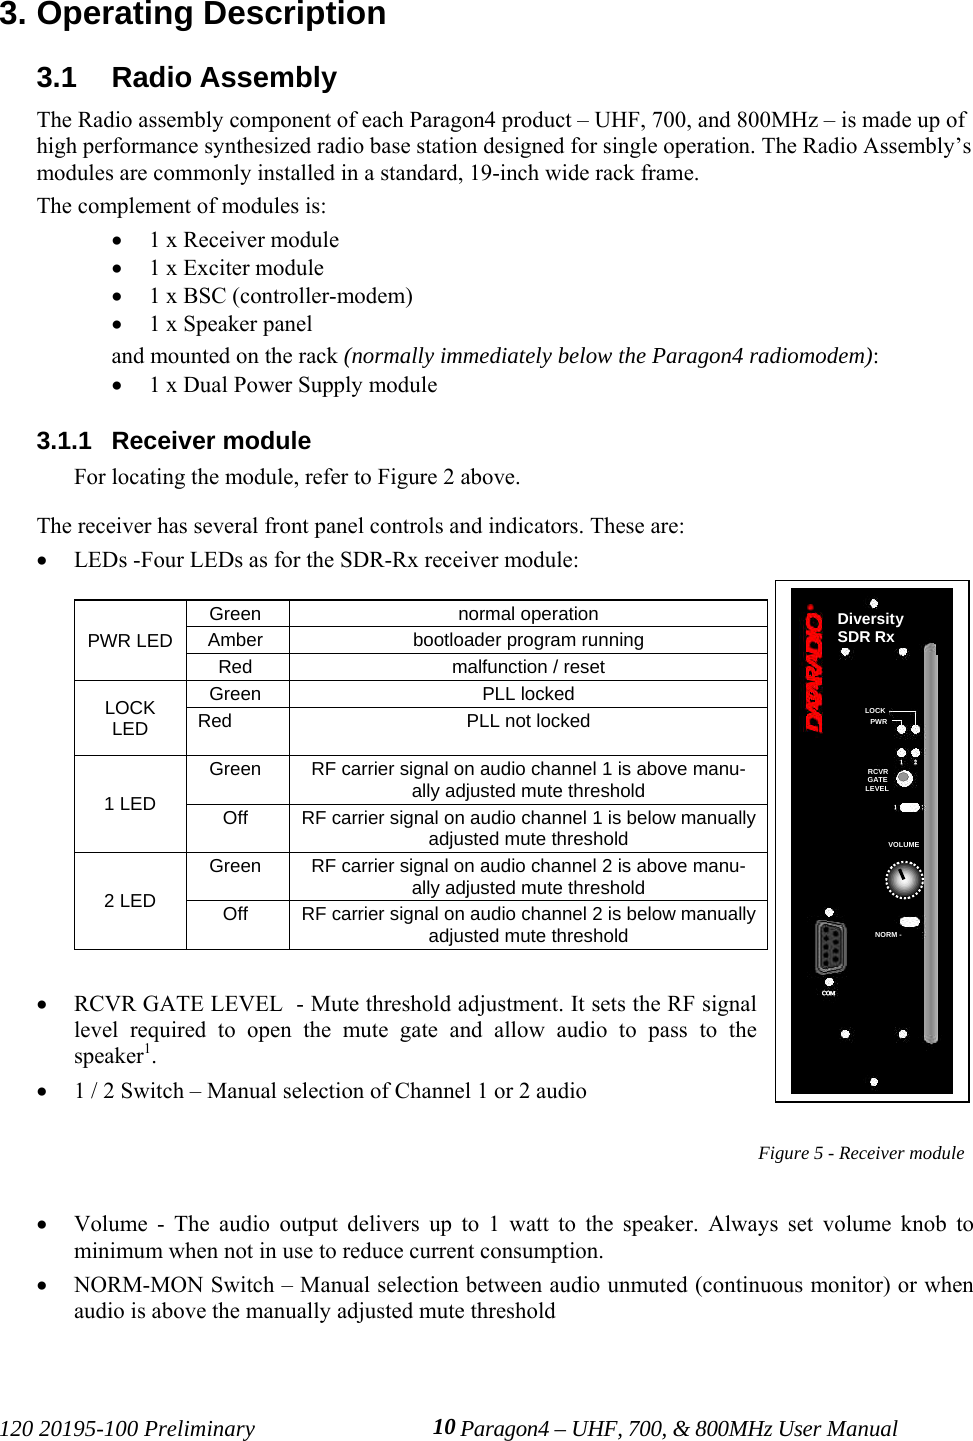 120 20195-100 Preliminary Paragon4 – UHF, 700, &amp; 800MHz User Manual103. Operating Description3.1  Radio Assembly The Radio assembly component of each Paragon4 product – UHF, 700, and 800MHz – is made up ofhigh performance synthesized radio base station designed for single operation. The Radio Assembly’smodules are commonly installed in a standard, 19-inch wide rack frame. The complement of modules is:• 1 x Receiver module• 1 x Exciter module• 1 x BSC (controller-modem)• 1 x Speaker paneland mounted on the rack (normally immediately below the Paragon4 radiomodem):• 1 x Dual Power Supply module3.1.1  Receiver moduleFor locating the module, refer to Figure 2 above. The receiver has several front panel controls and indicators. These are:• LEDs -Four LEDs as for the SDR-Rx receiver module:Green  normal operationAmber  bootloader program runningPWR LEDRed  malfunction / resetGreen  PLL lockedLOCKLED Red          PLL not lockedGreen  RF carrier signal on audio channel 1 is above manu-ally adjusted mute threshold1 LED Off  RF carrier signal on audio channel 1 is below manuallyadjusted mute thresholdGreen  RF carrier signal on audio channel 2 is above manu-ally adjusted mute threshold2 LED Off  RF carrier signal on audio channel 2 is below manuallyadjusted mute threshold• RCVR GATE LEVEL  - Mute threshold adjustment. It sets the RF signallevel required to open the mute gate and allow audio to pass to thespeaker1.• 1 / 2 Switch – Manual selection of Channel 1 or 2 audioFigure 5 - Receiver module• Volume - The audio output delivers up to 1 watt to the speaker. Always set volume knob tominimum when not in use to reduce current consumption.• NORM-MON Switch – Manual selection between audio unmuted (continuous monitor) or whenaudio is above the manually adjusted mute threshold LOCK  PWR RCVR GATELEVELVOLUME NORM -DiversitySDR Rx